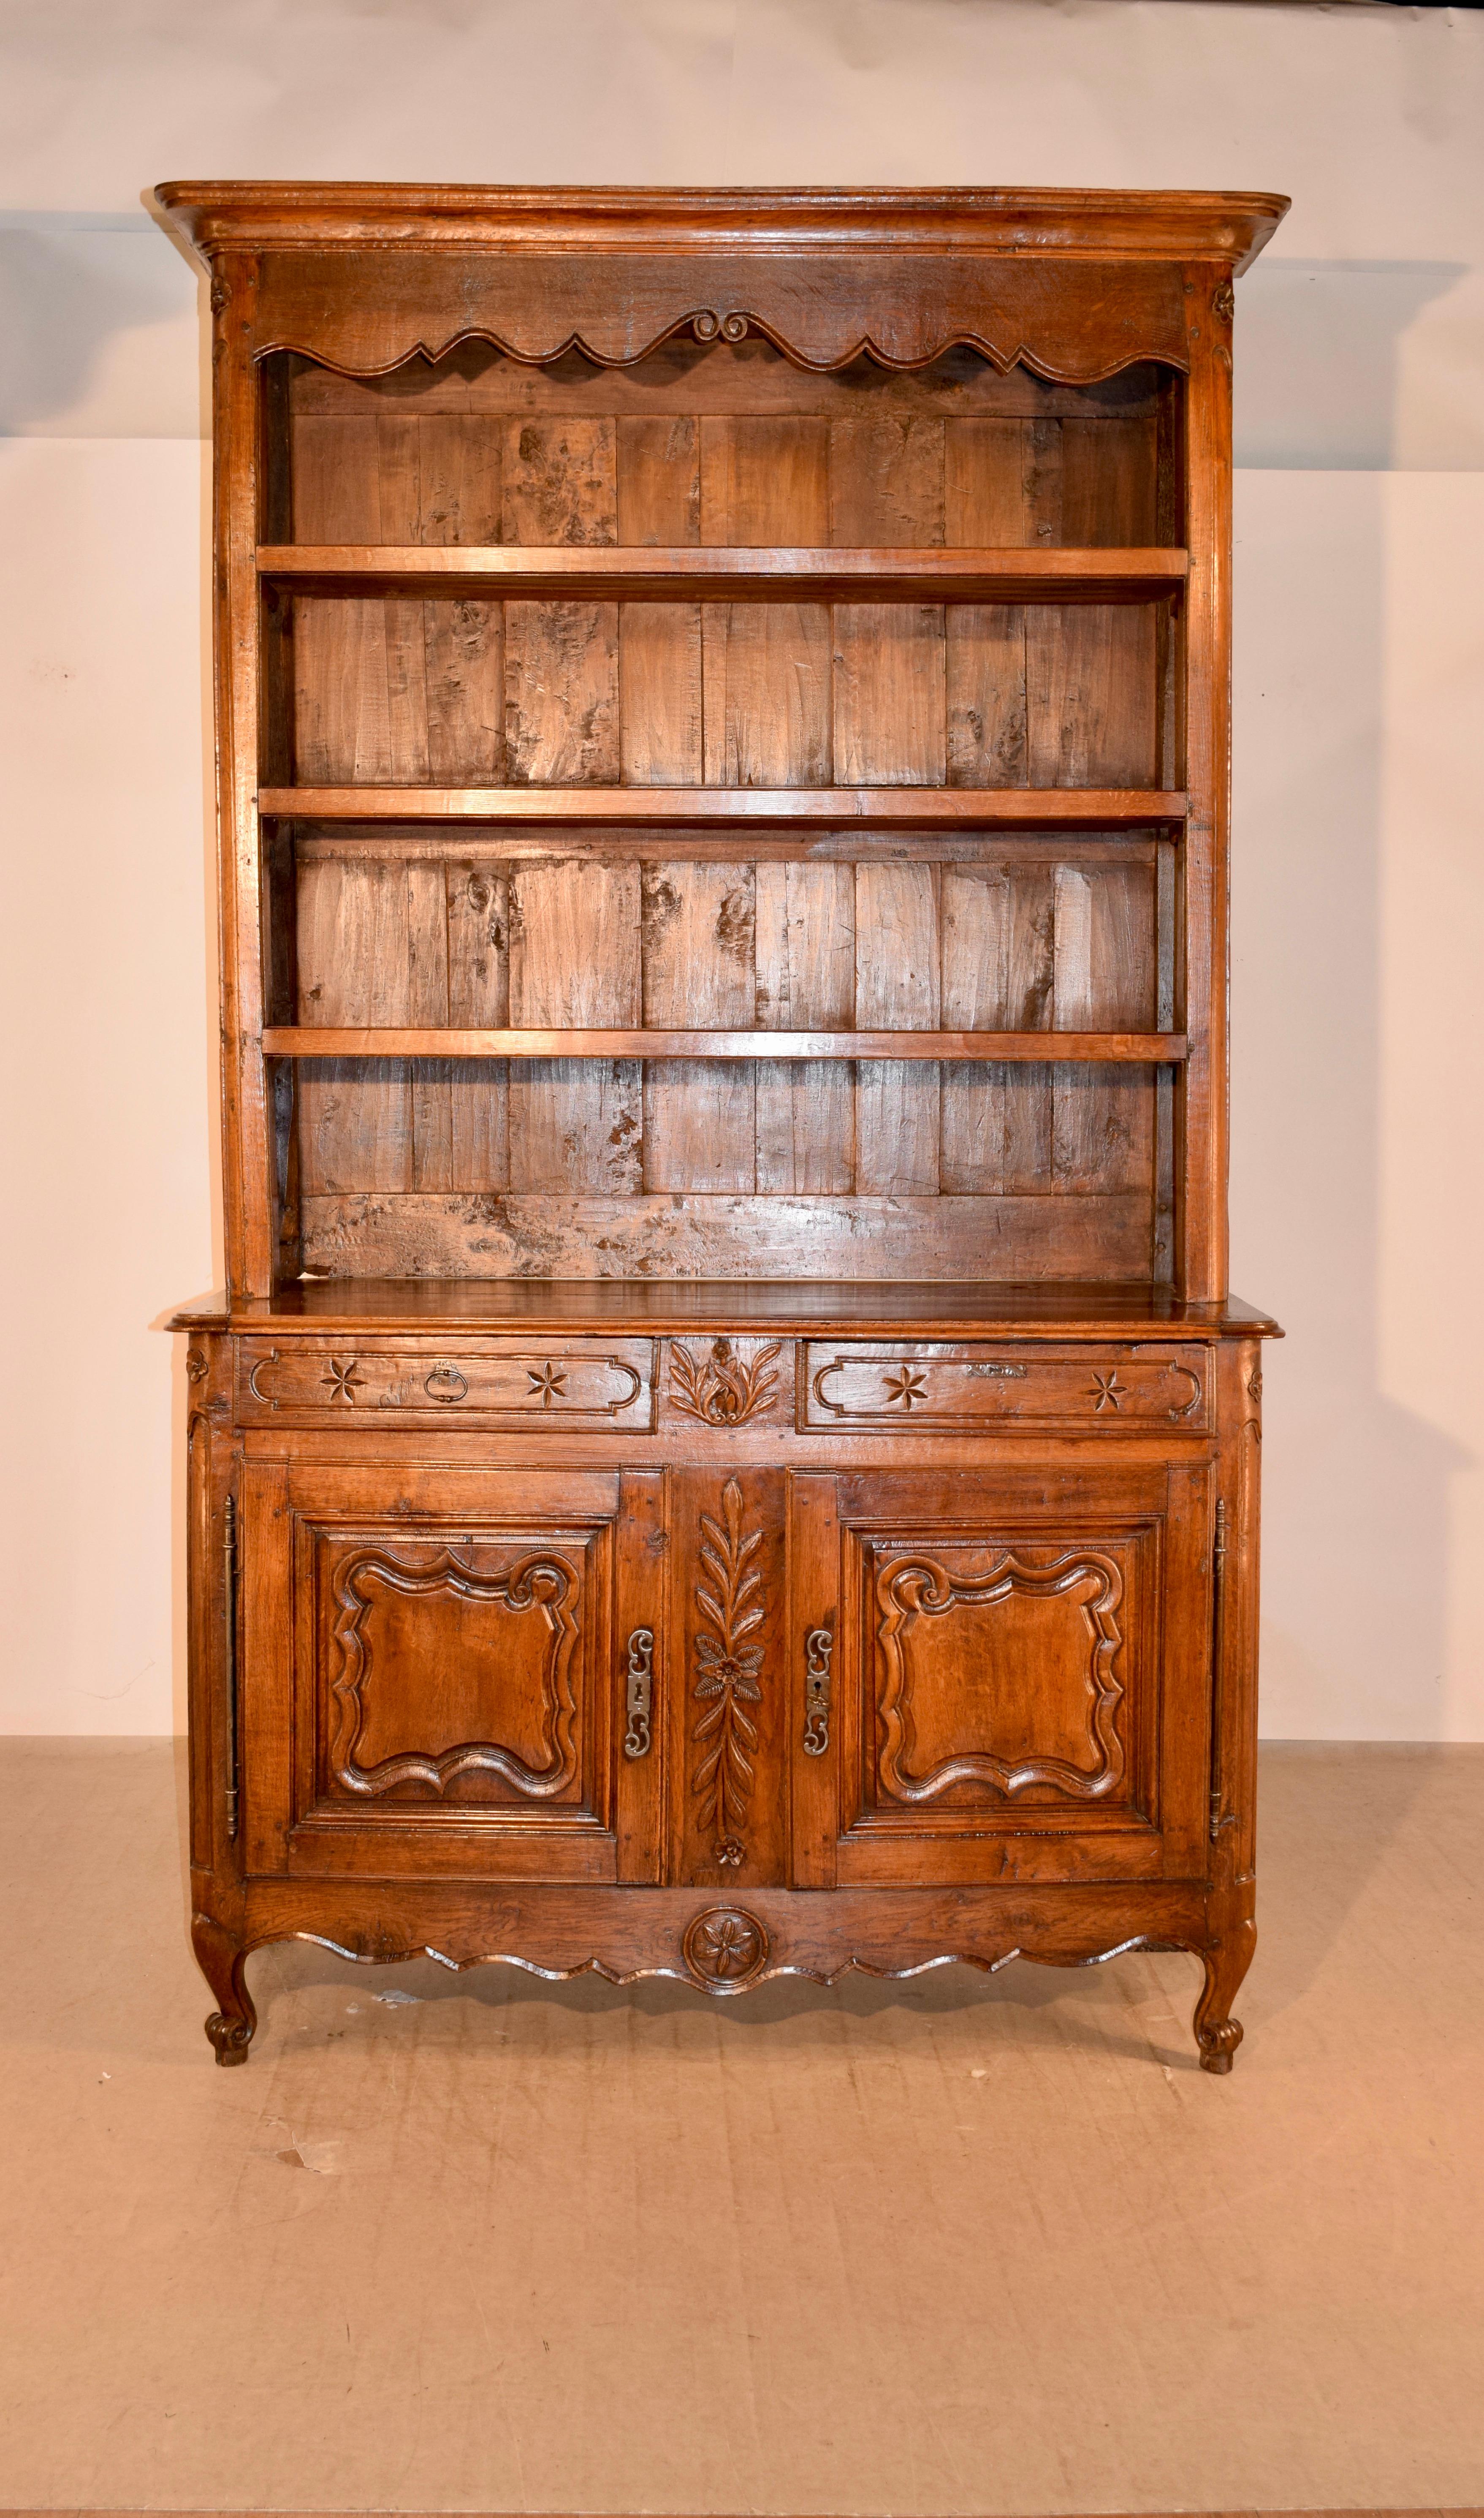 18th century country French wall cupboard made from oak. This is a magnificent piece. It has a detachable crown, following down to a hand scalloped frieze and three hand hewn shelves, all with plate rails. The sides of the piece are raised paneled,